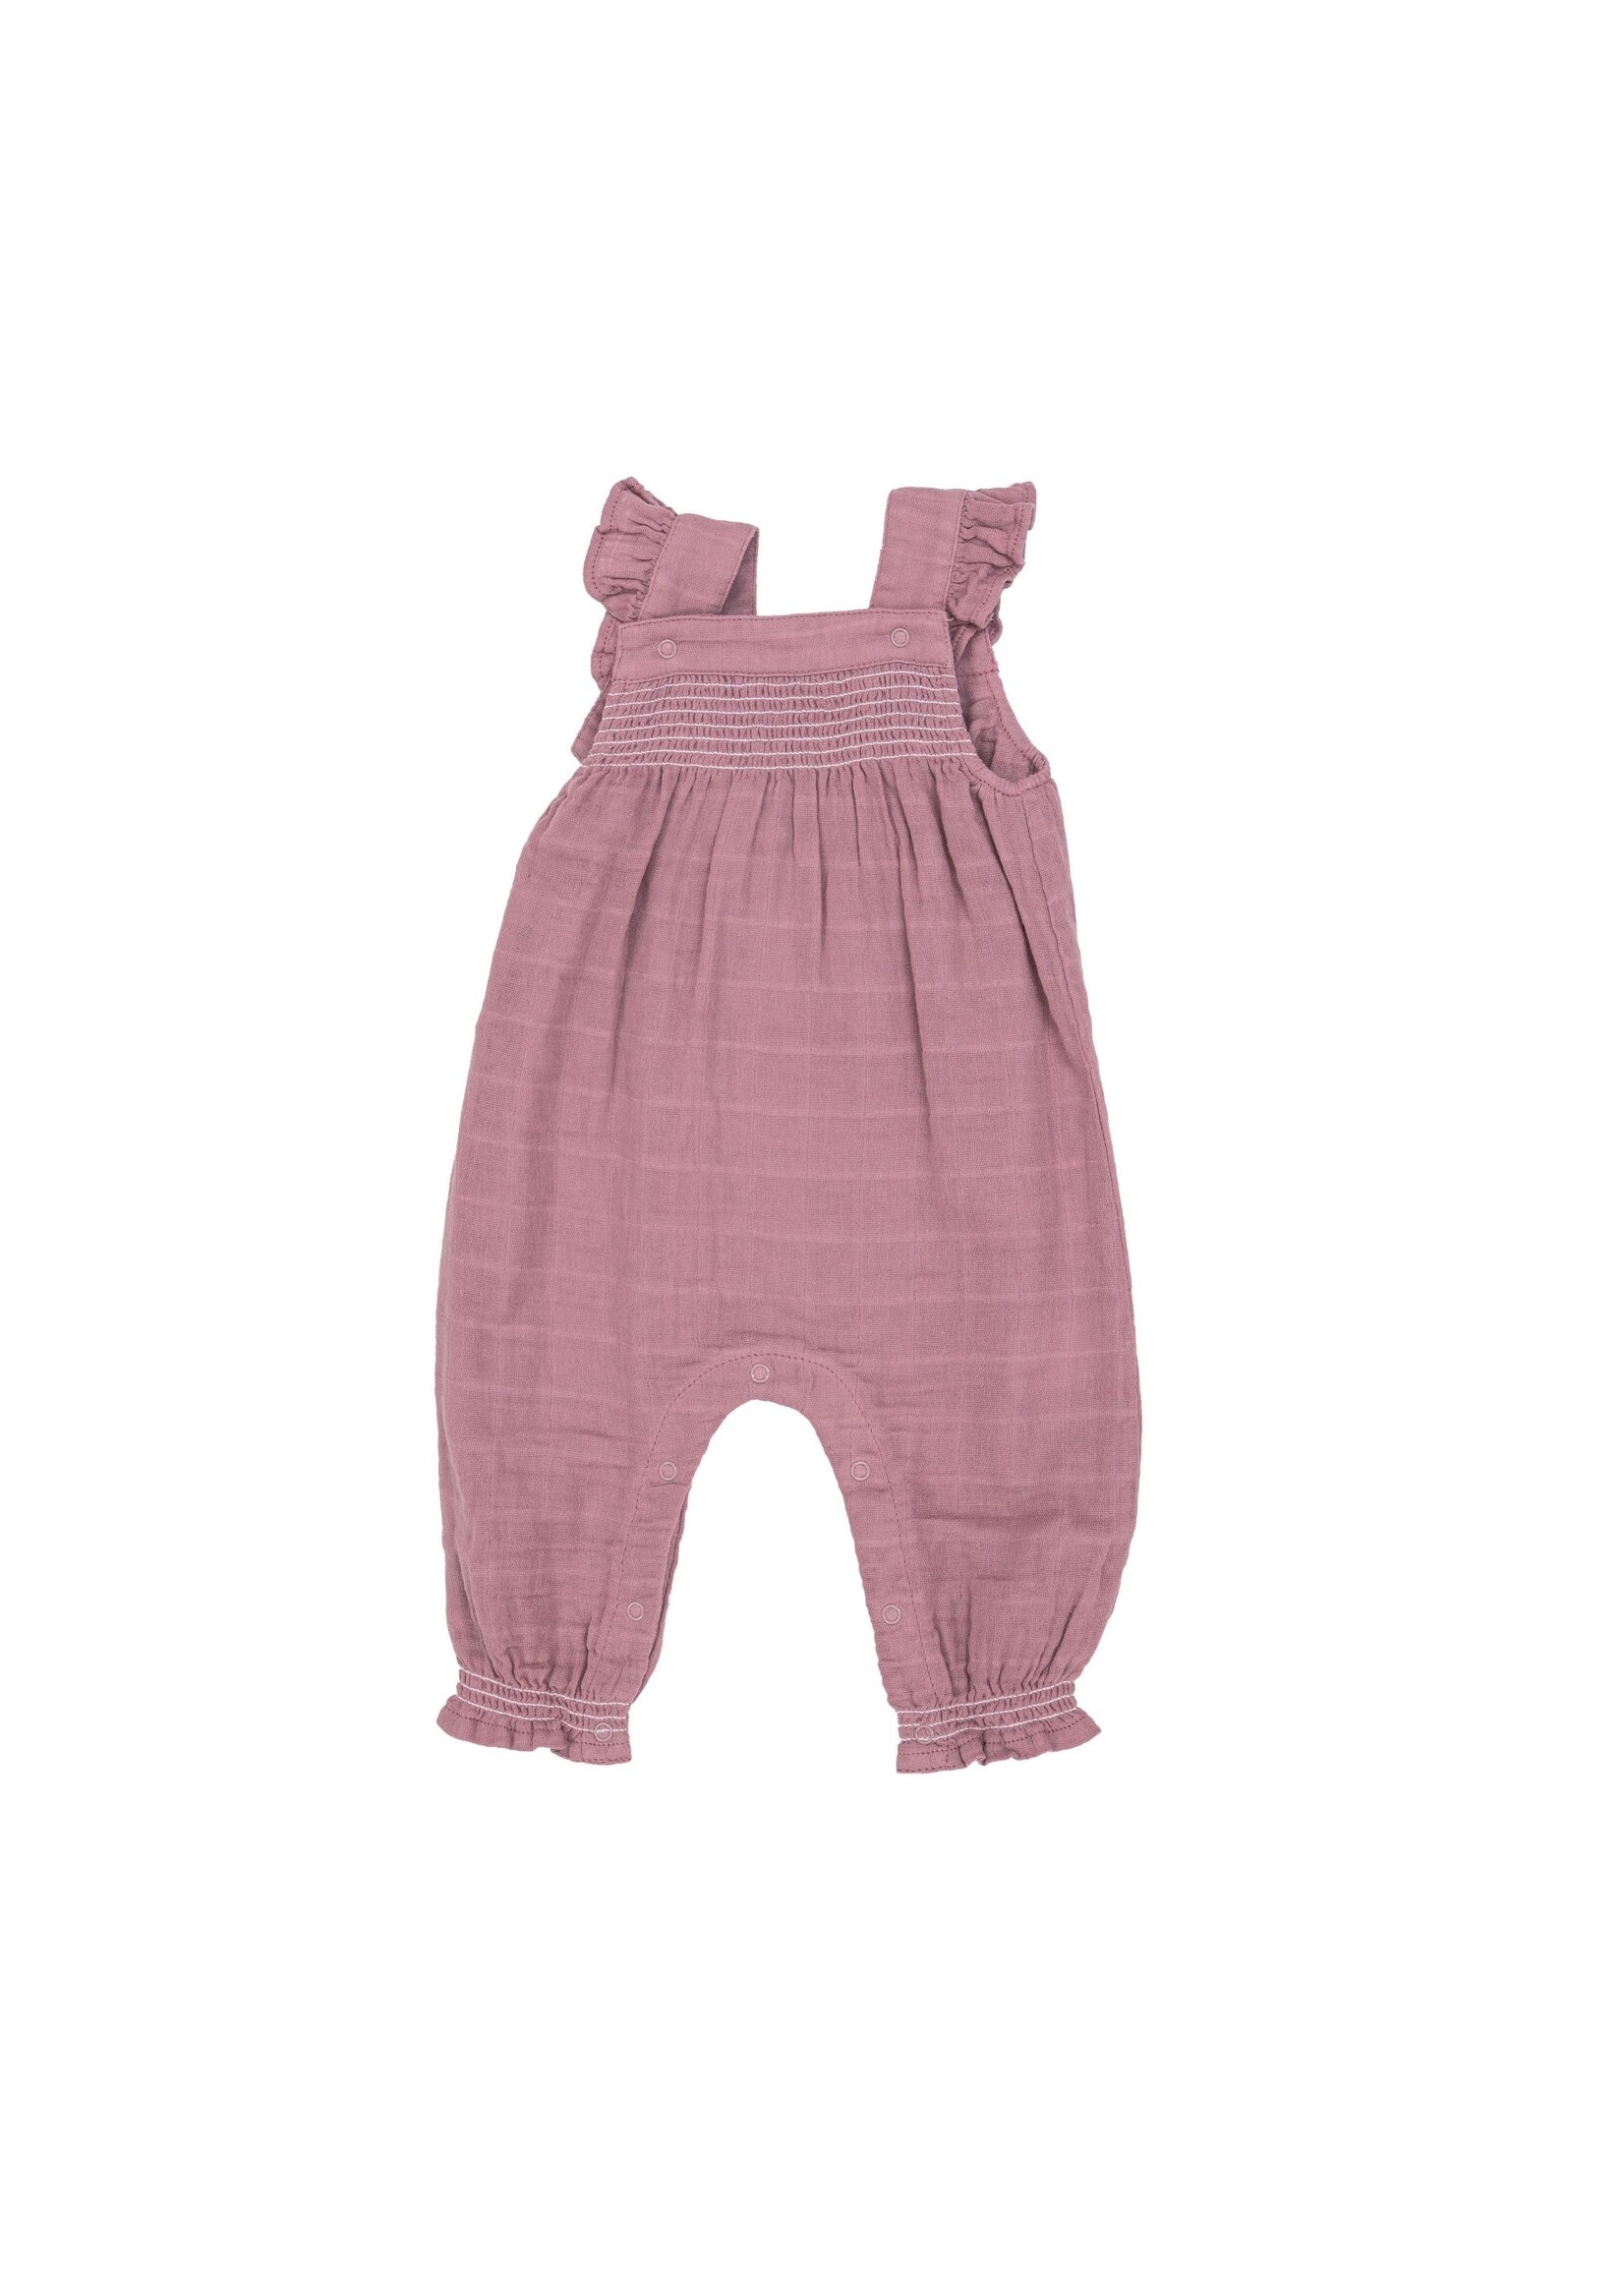 Angel Dear Fox Glove Solid Smocked Overall